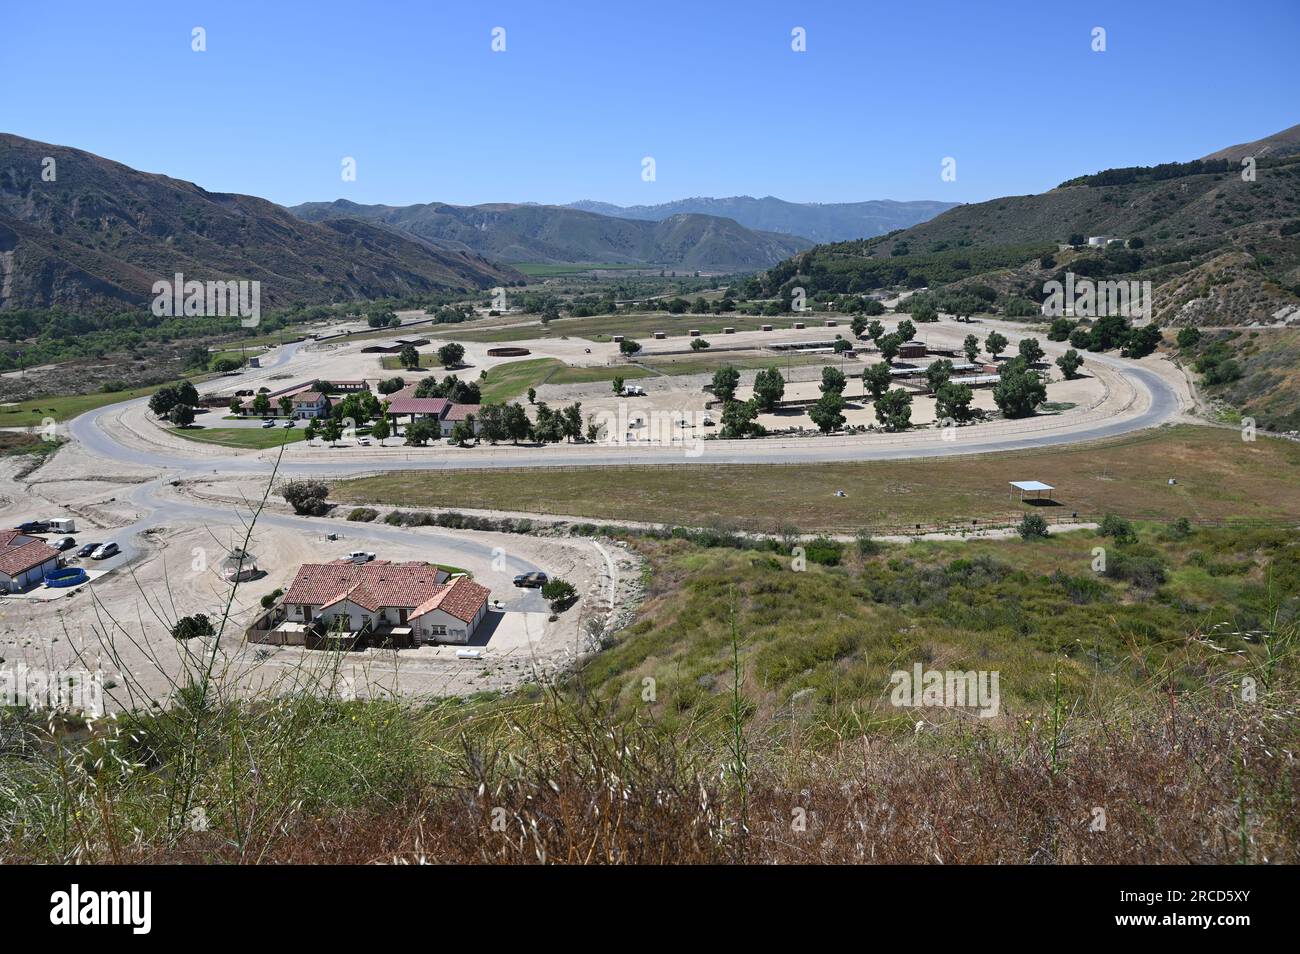 The valley behind the Santa Felicia Dam at Lake Piru reservoir located in Los Padres National Forest and Topatopa Mountains of Ventura County, Califor Stock Photo